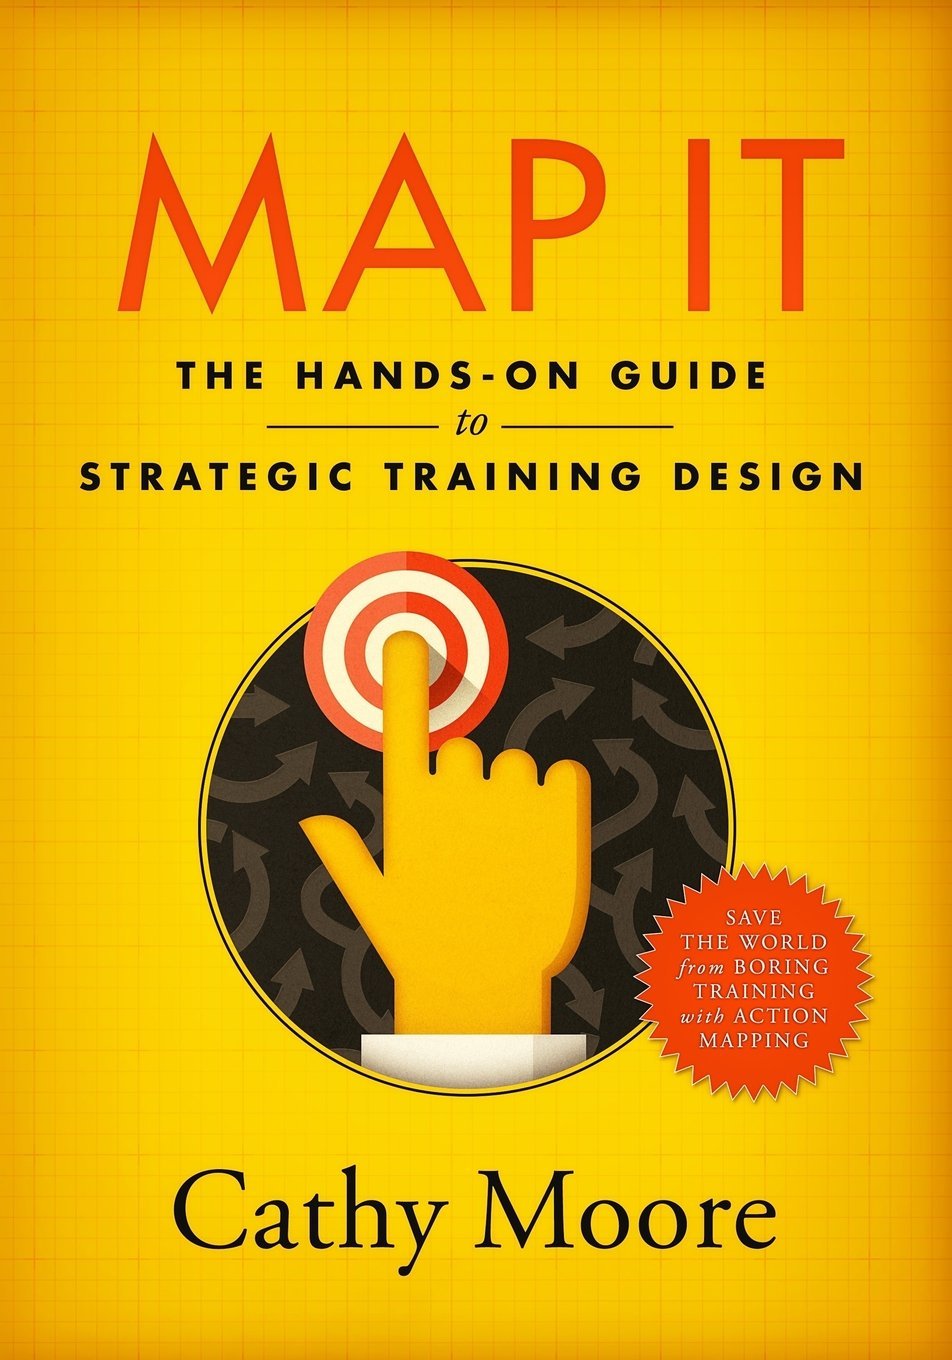 Map It by Cathy Moore